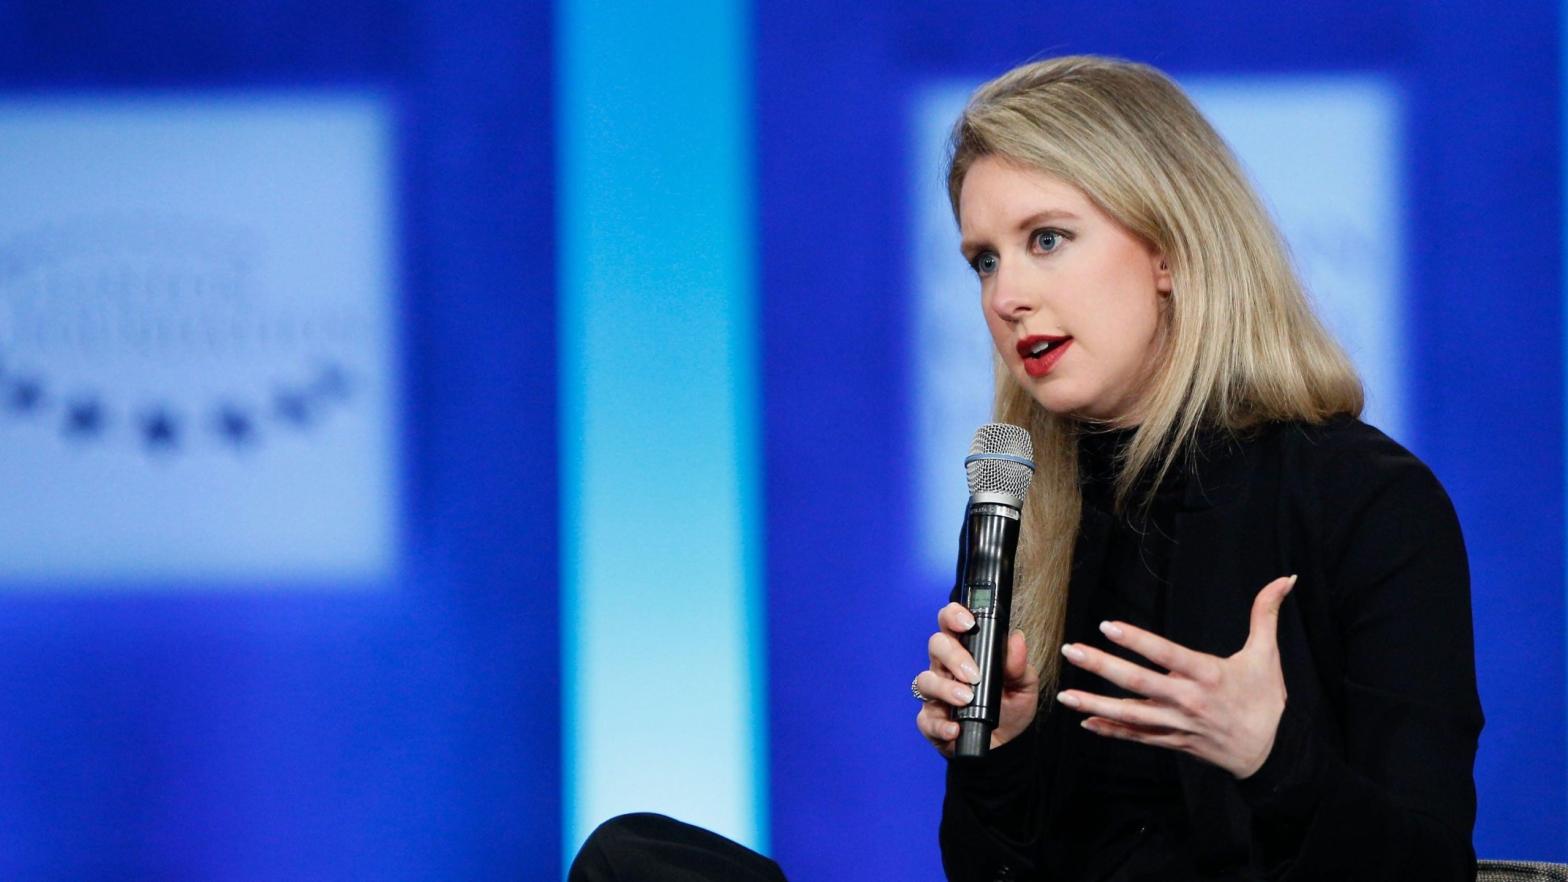 Elizabeth Holmes speaks on stage during the closing session of the Clinton Global Initiative 2015 on September 29, 2015 in New York City. (Photo: JP Yim, Getty Images)